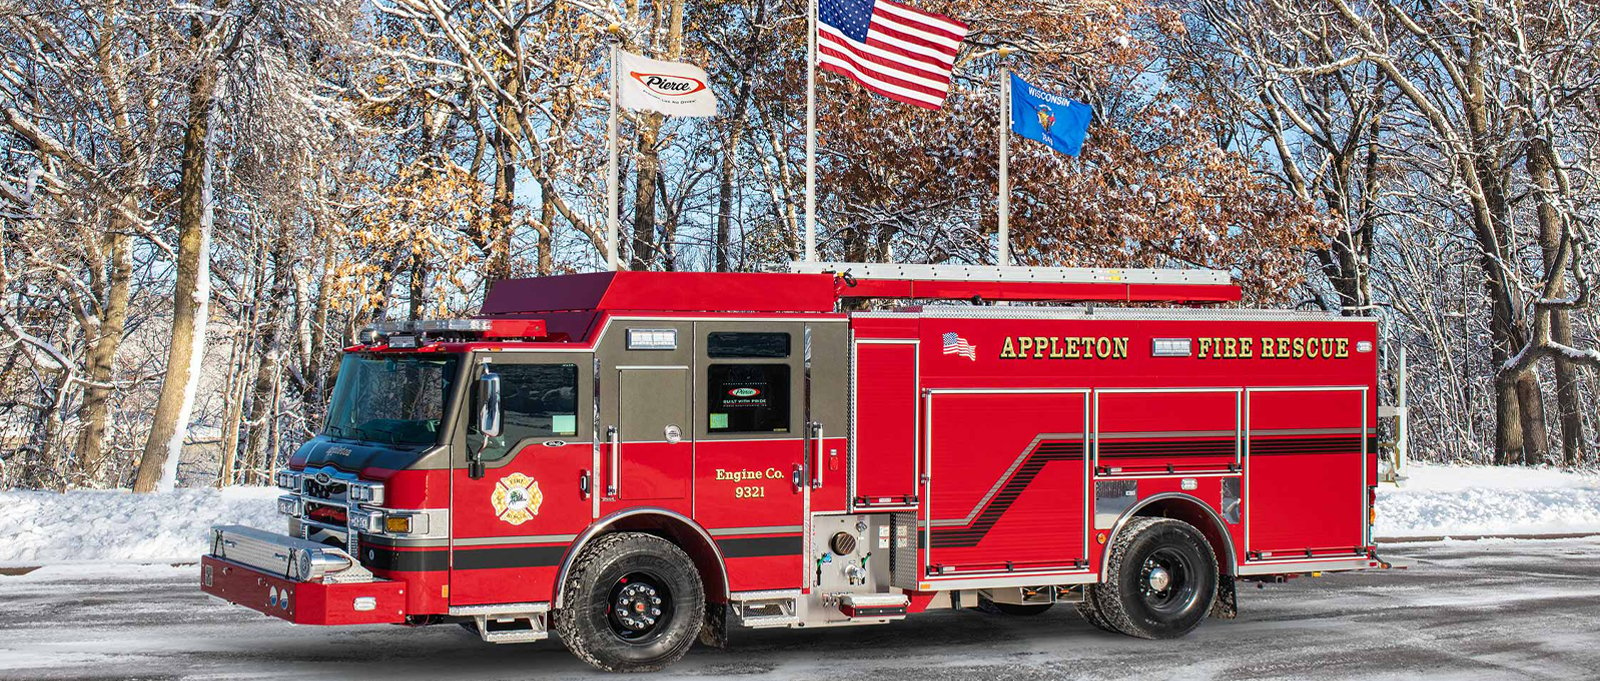 A red Appleton Fire Rescue urban fire truck is parked with flags, trees and snow in the background. 